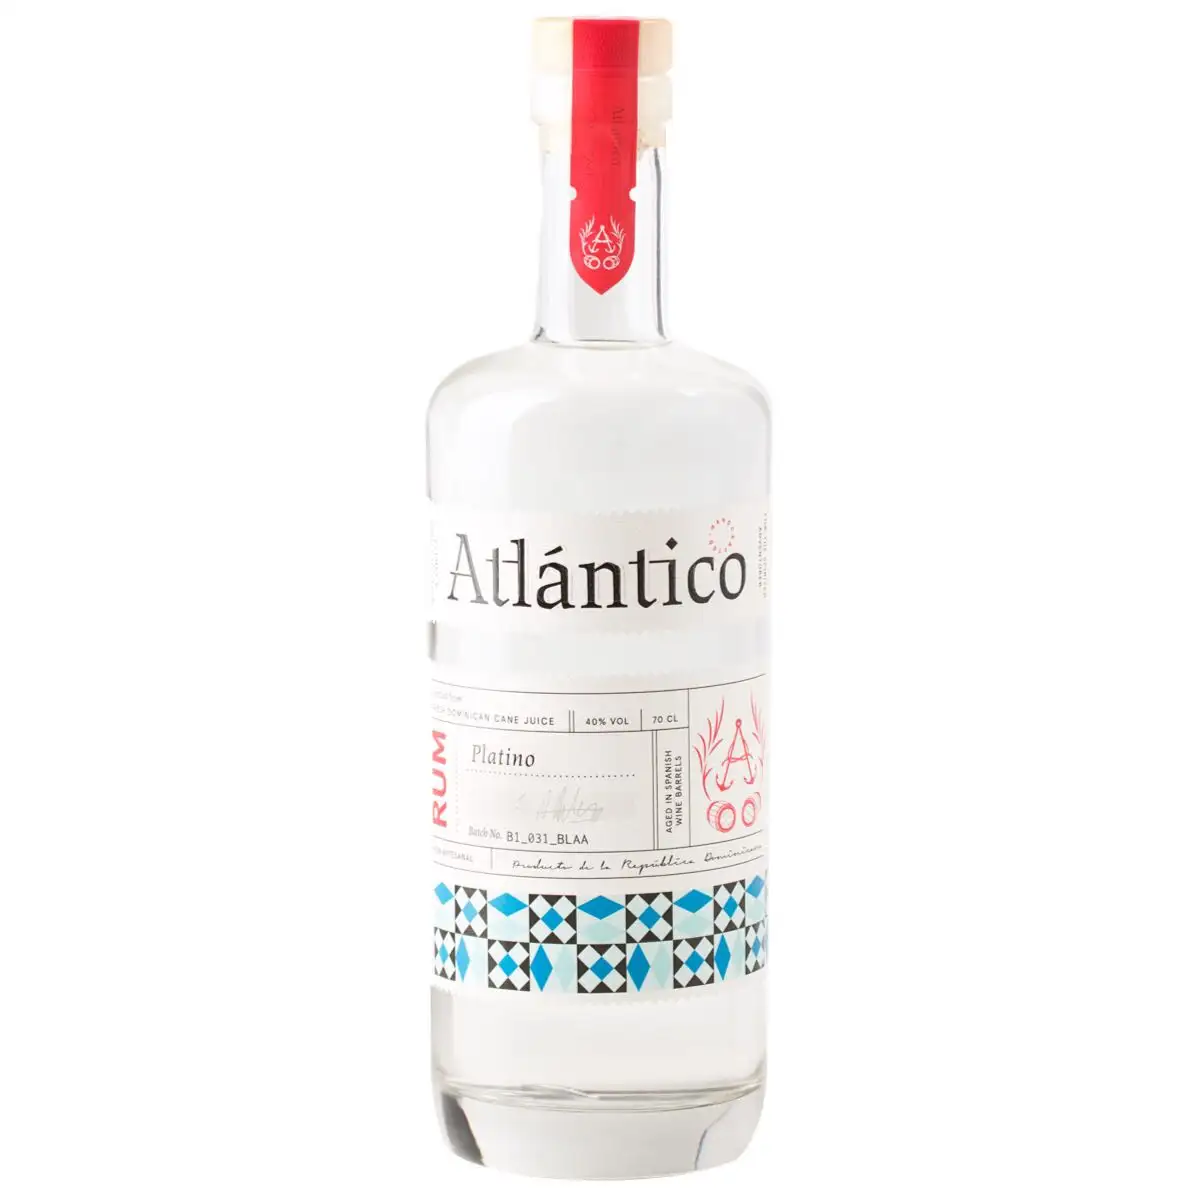 Image of the front of the bottle of the rum Atlantico Platino